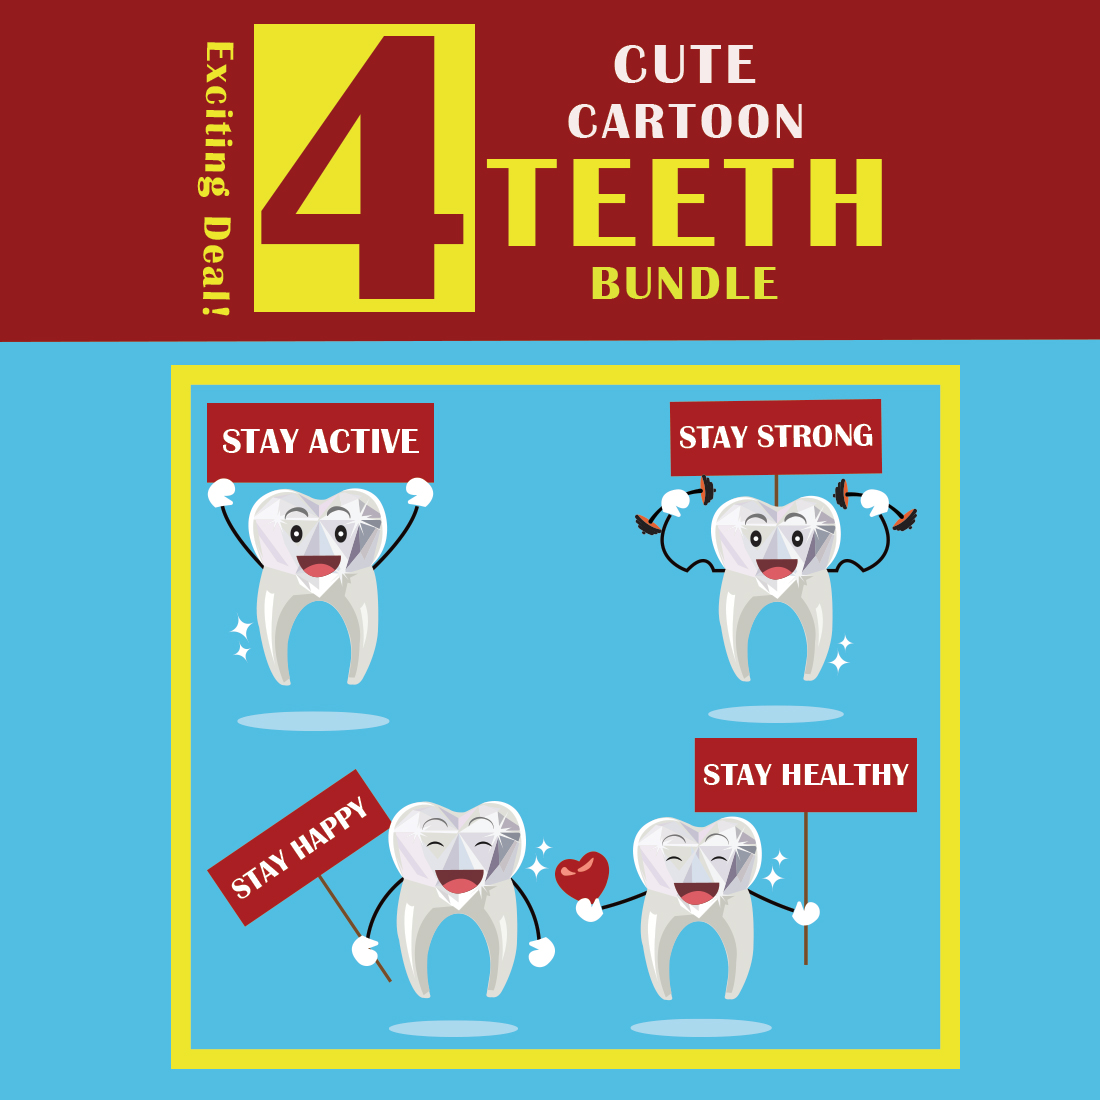 4 Cute Cartoon teeth High Quality Vector Illustration for DENTAL purposes preview image.